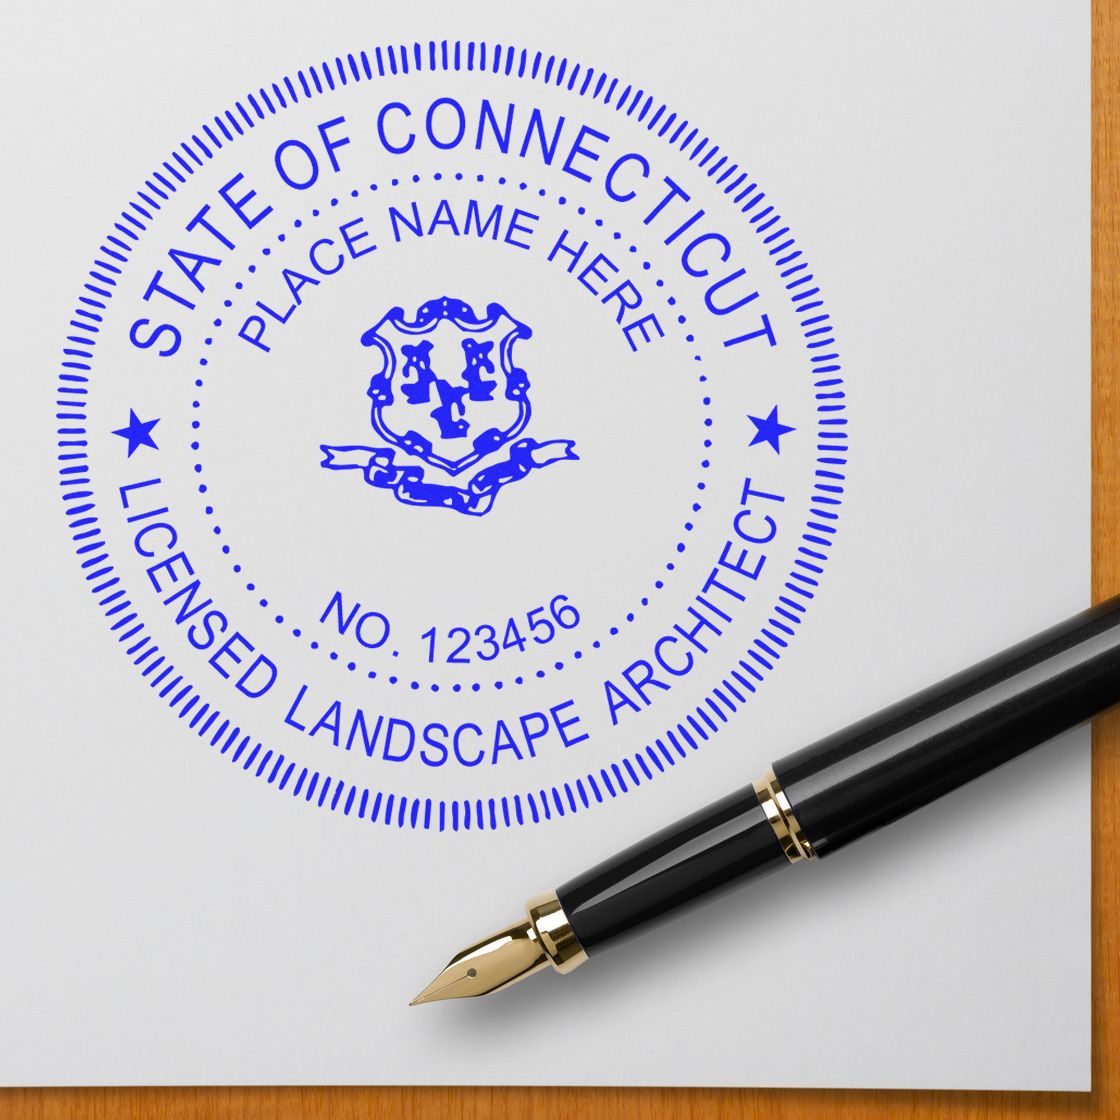 Another Example of a stamped impression of the Slim Pre-Inked Connecticut Landscape Architect Seal Stamp on a piece of office paper.